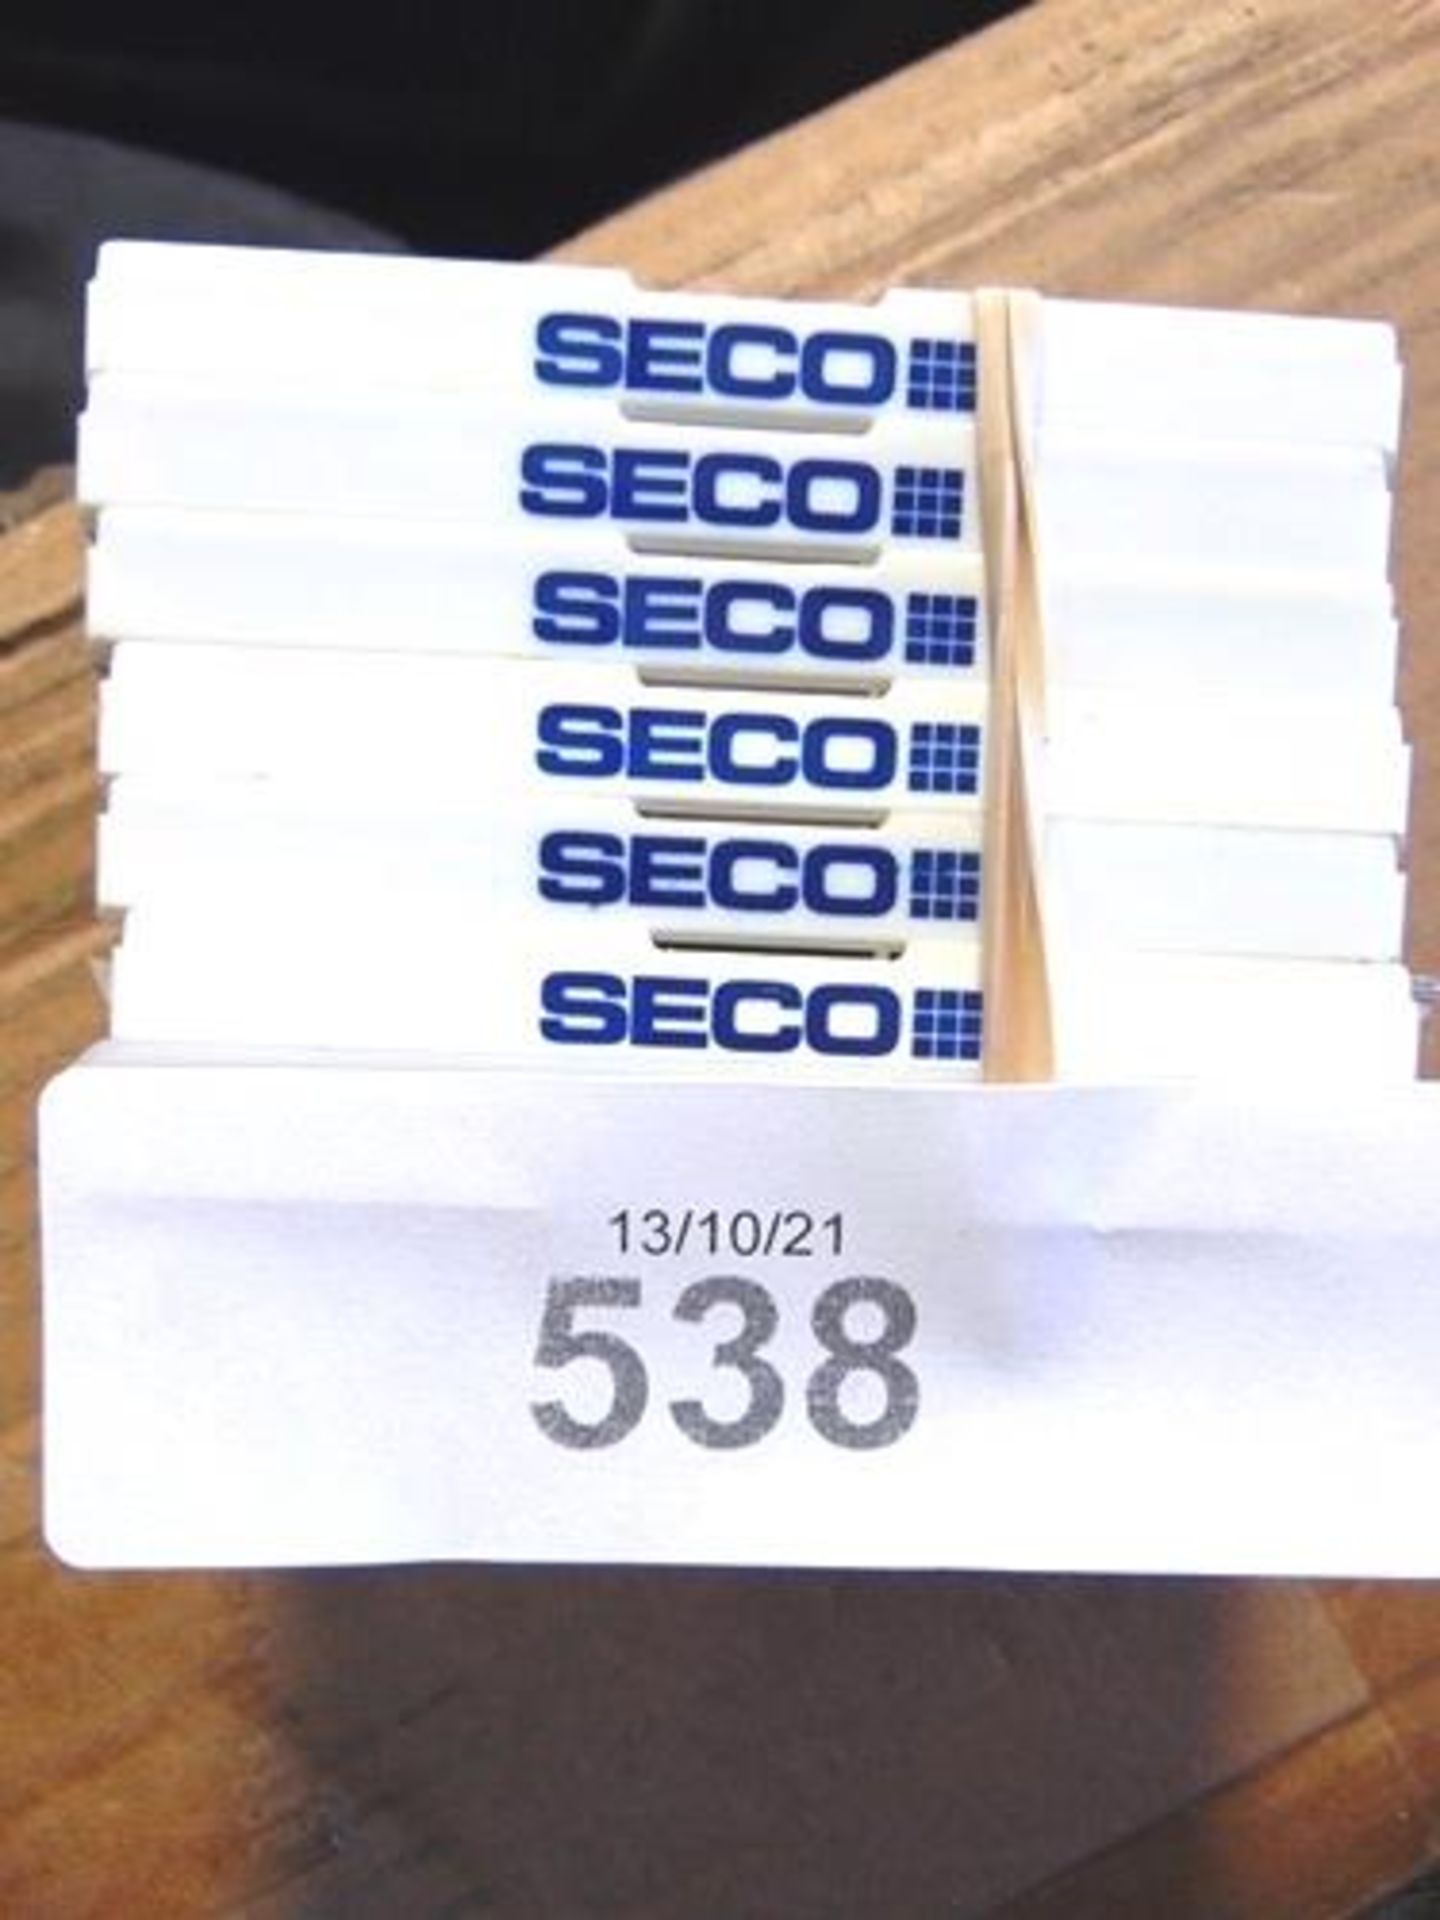 A selection of Seco metal lathe inserts including 30 x TCMT16T302-F1.TP3500, 10 x SEMX1204AFTN-